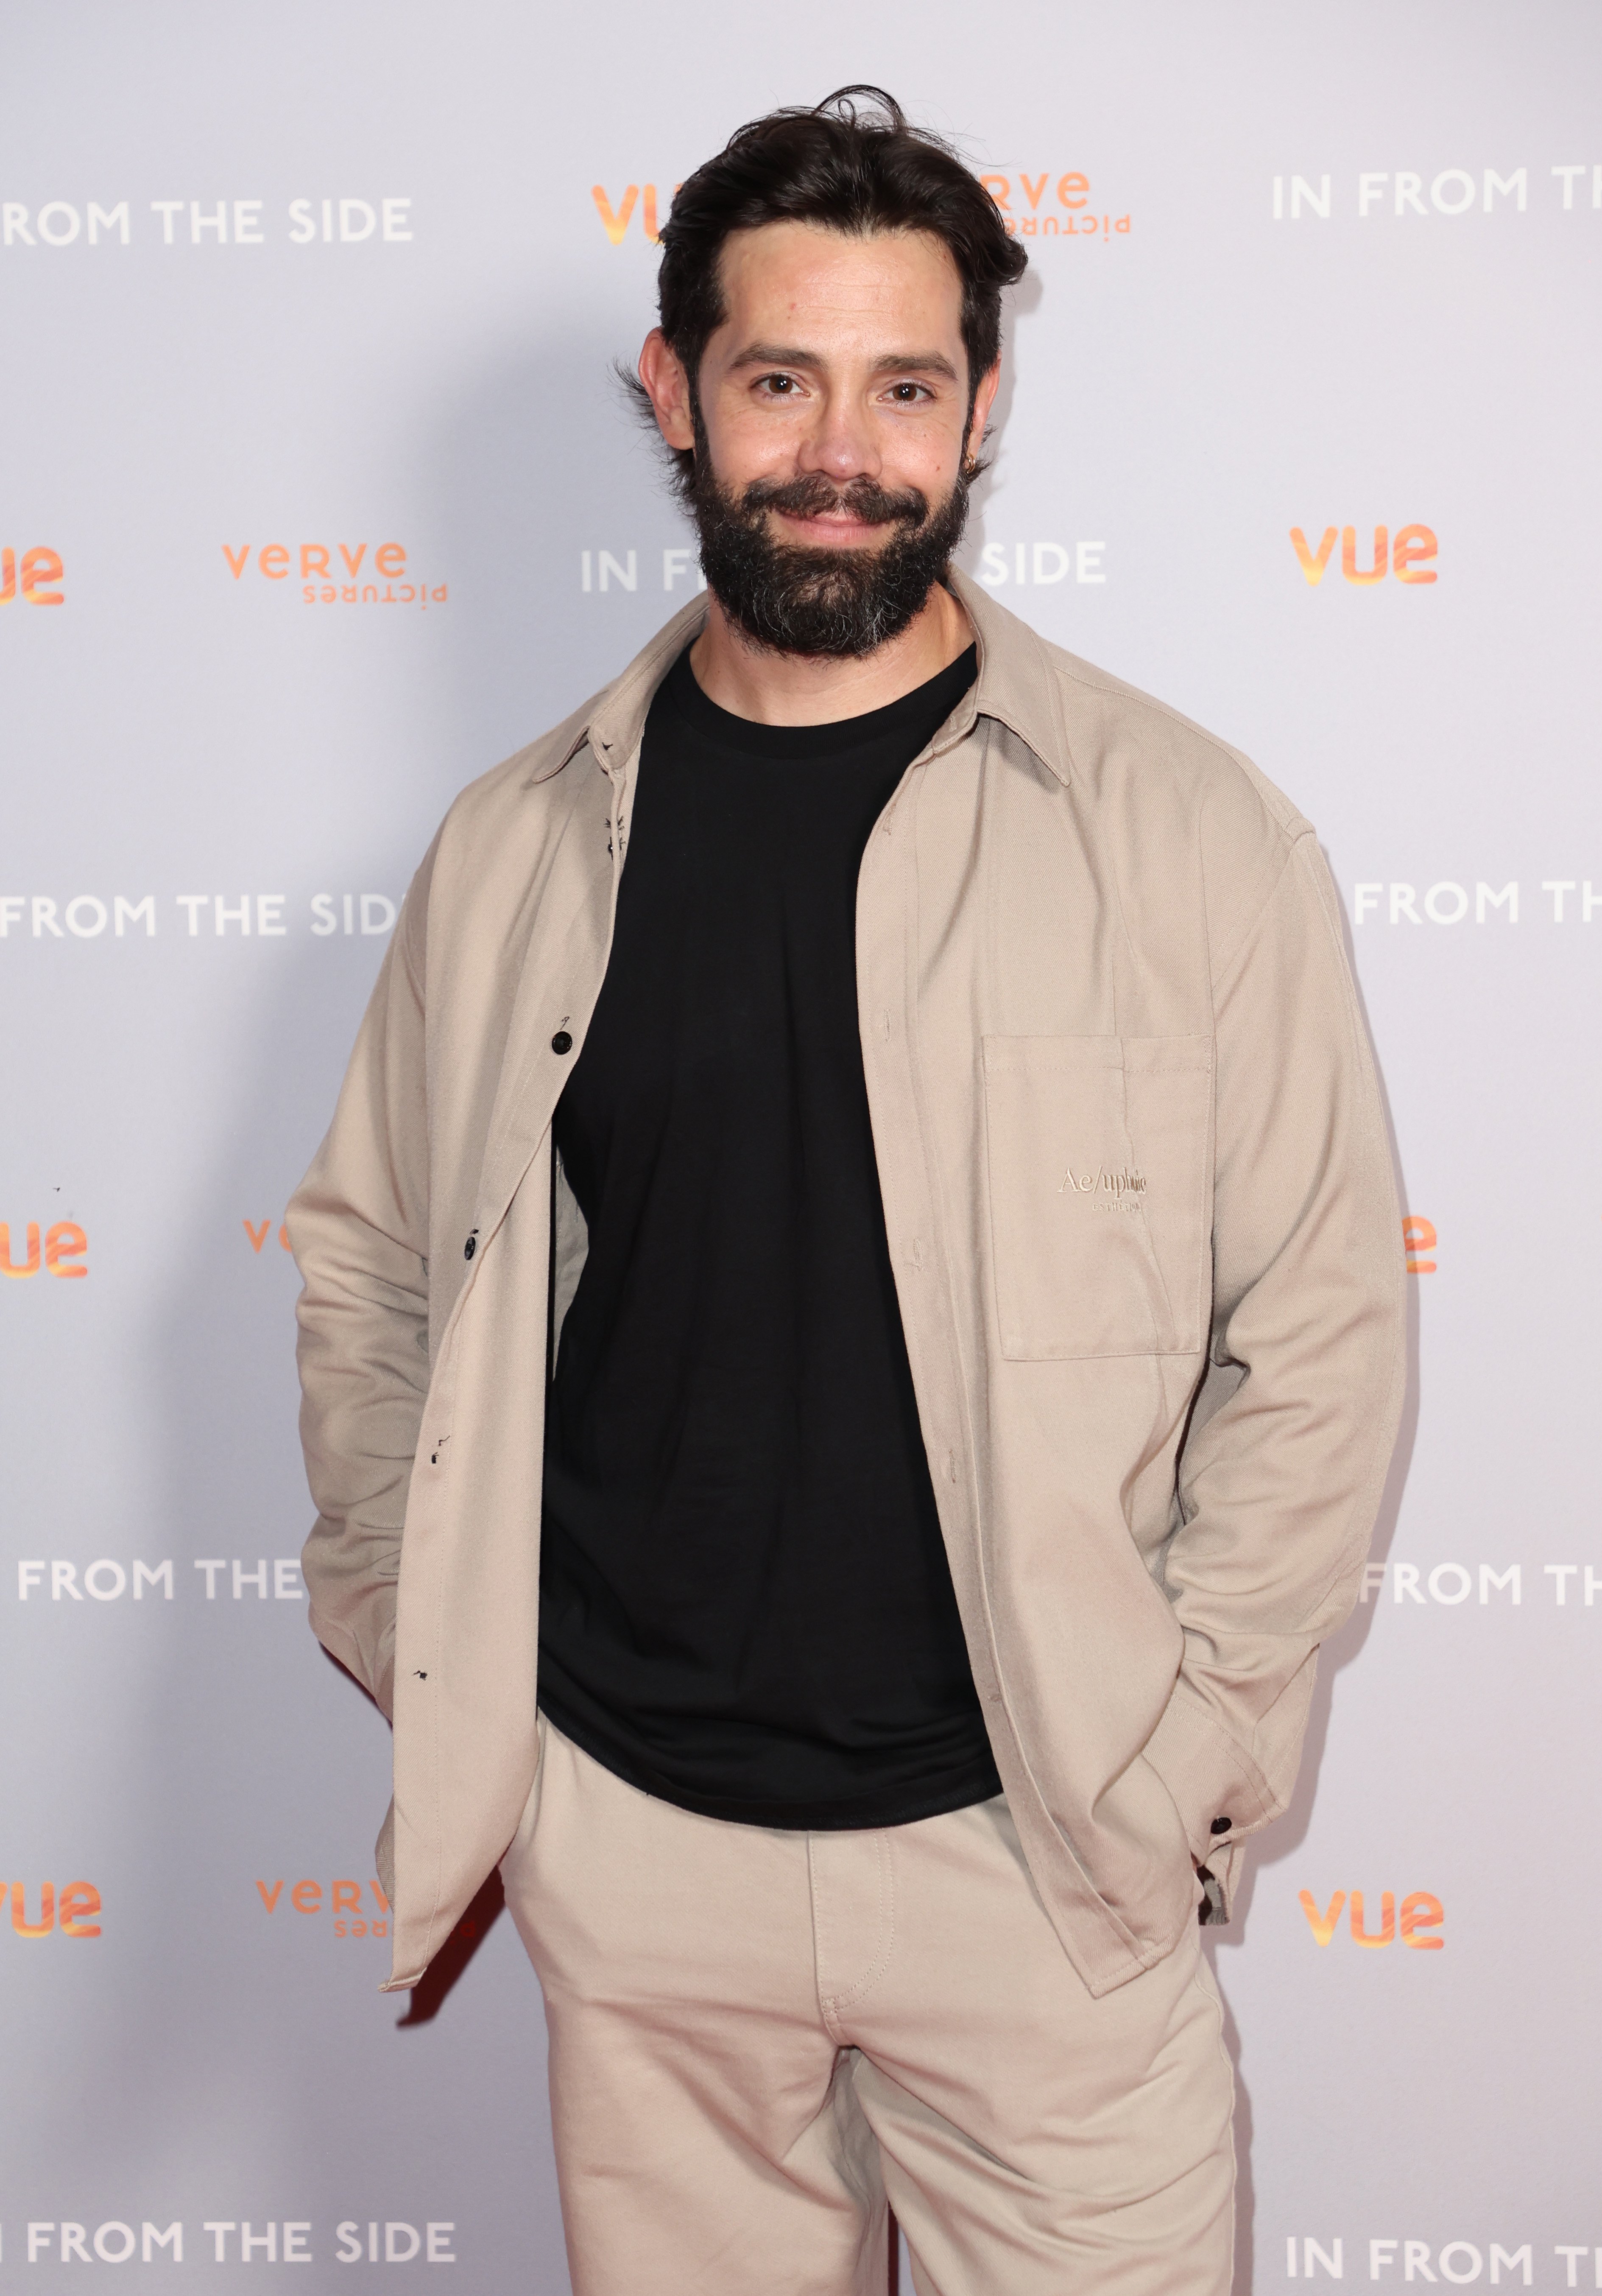 Charlie King during the UK gala event for "In from the Side" at Vue West End on September 06, 2022, in London, England. | Source: Getty Images